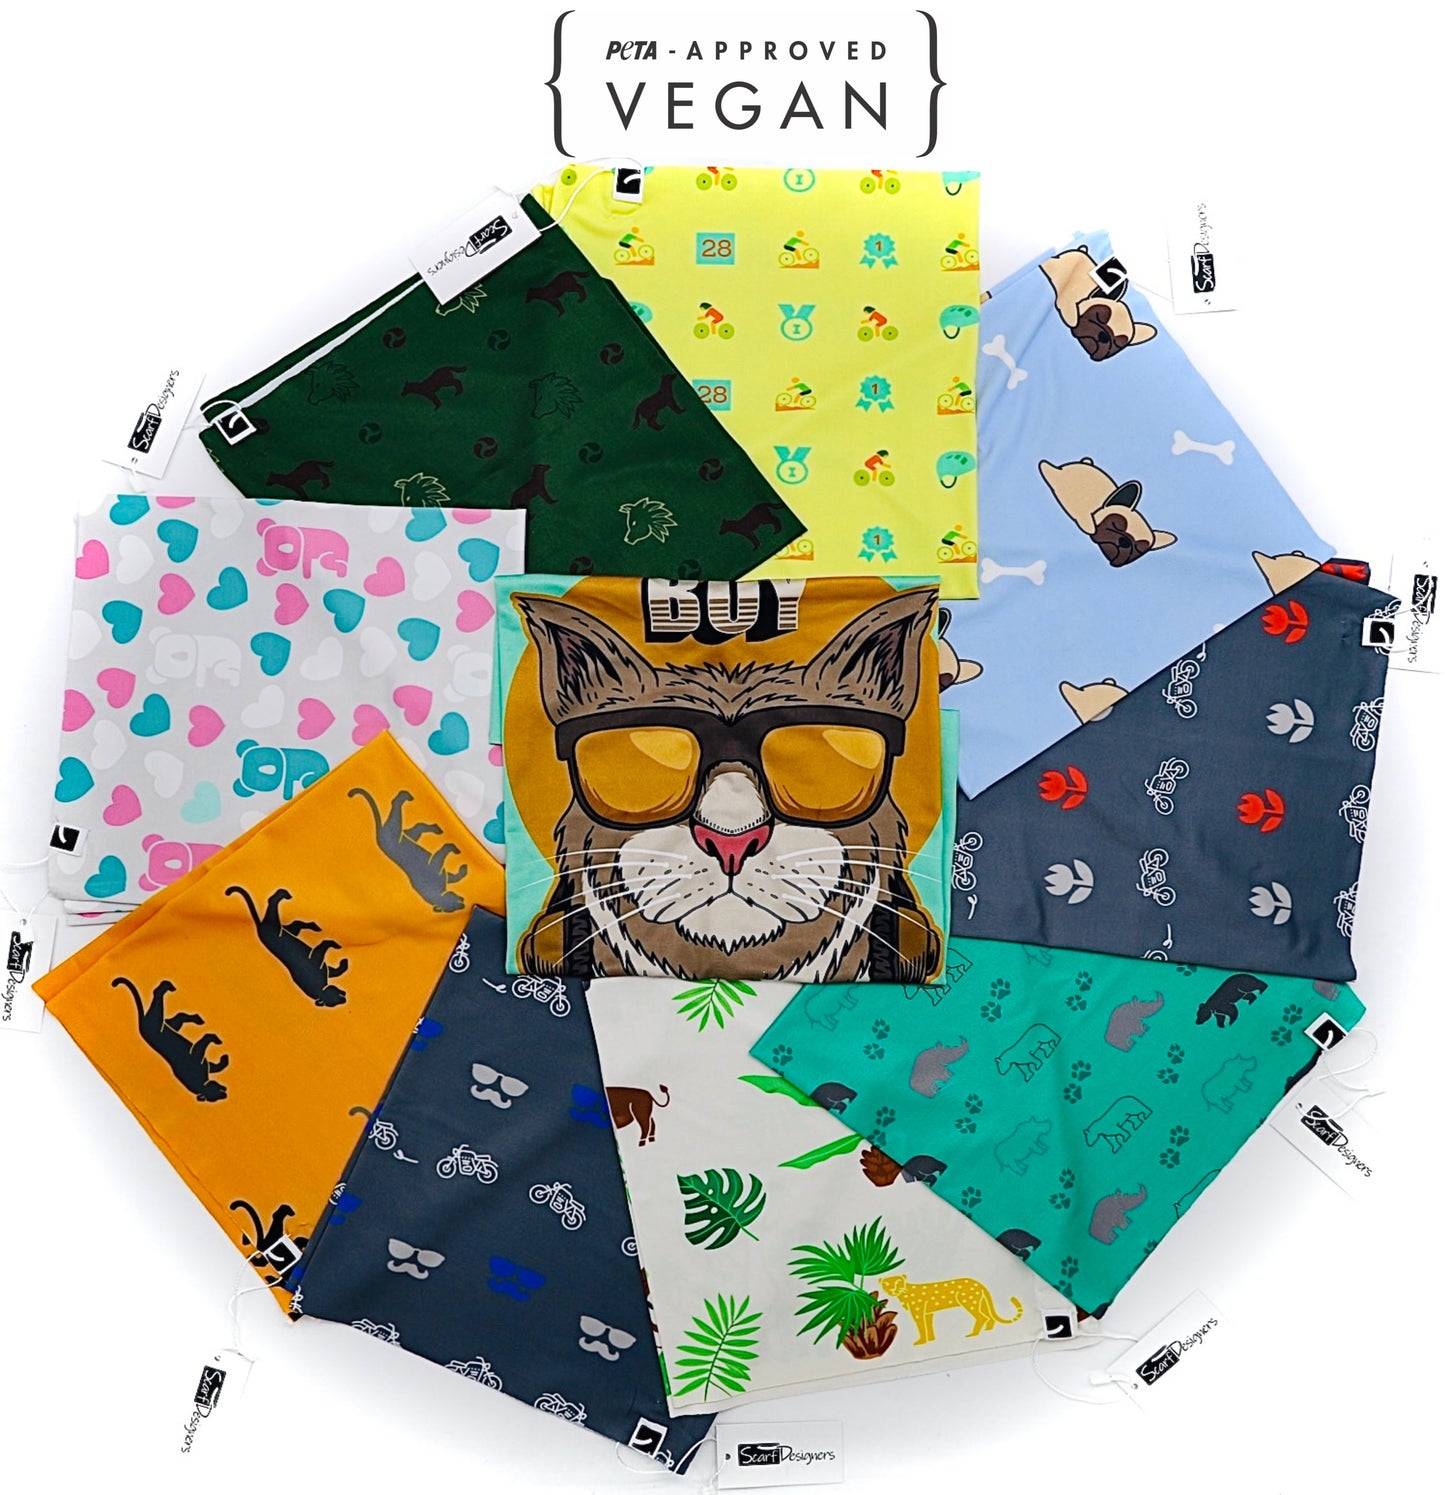 This is a unisex, multifunctional and sustainable bandana with a cat print in light green. It is made from recycled polyester which is breathable, durable, soft to touch, easy to care and fast drying material. It makes it perfectly suitable for all kinds of sports like biking, hiking, jogging or skiing. This is a versatile bandana that can be used as a scarf, face mask, bandana or headband and it is also known as tube scarf, neck gaiter or face mask. It is a vegan product certified by PETA.